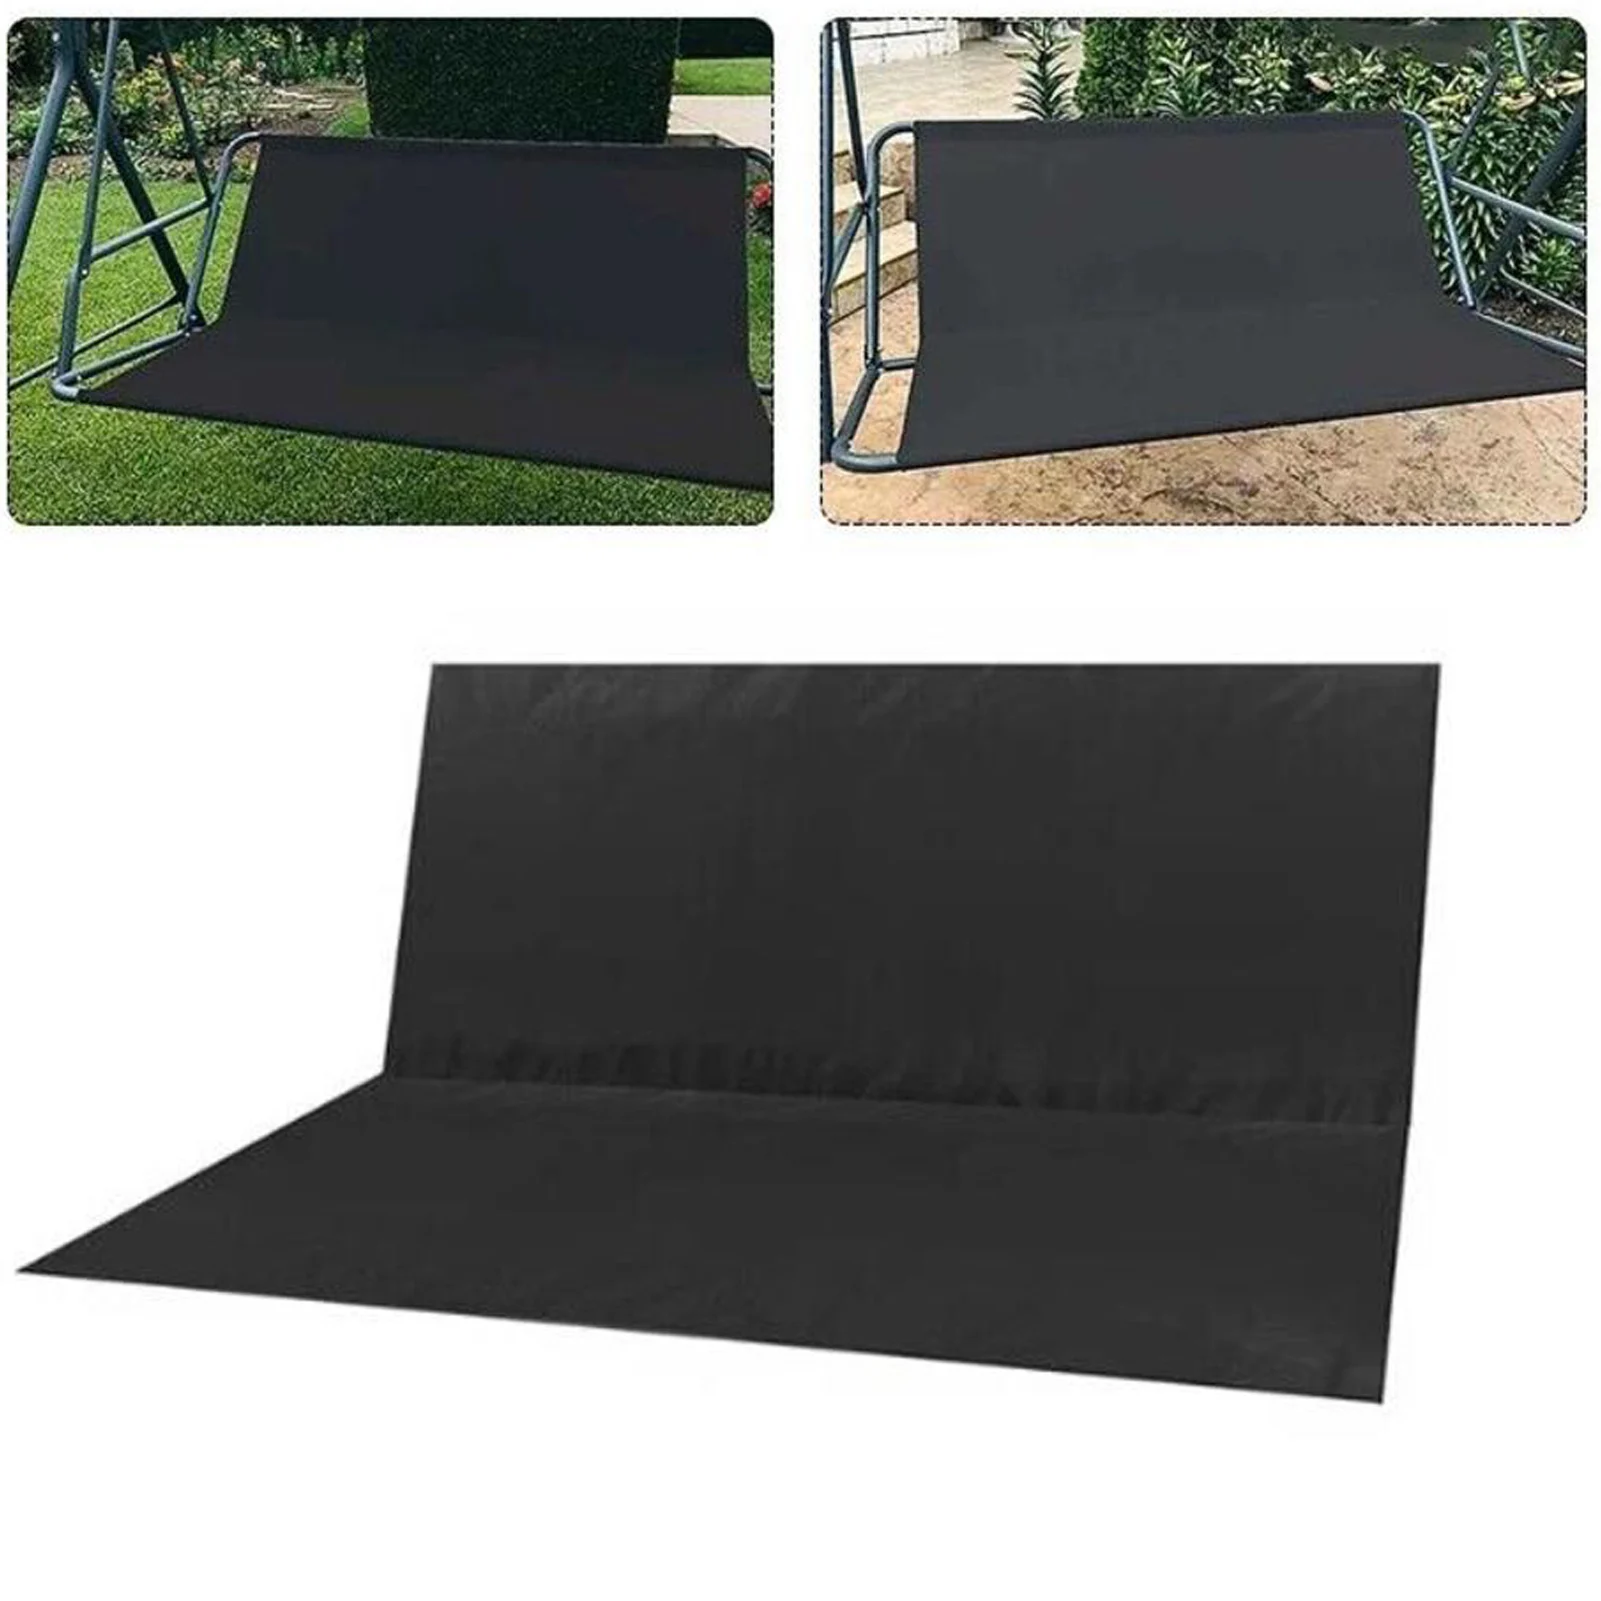 Waterproof Swing Cover Swing Cushion Replacement Porch Bench Sling Chair Replacement Covers Outdoor Furniture Protector Uv